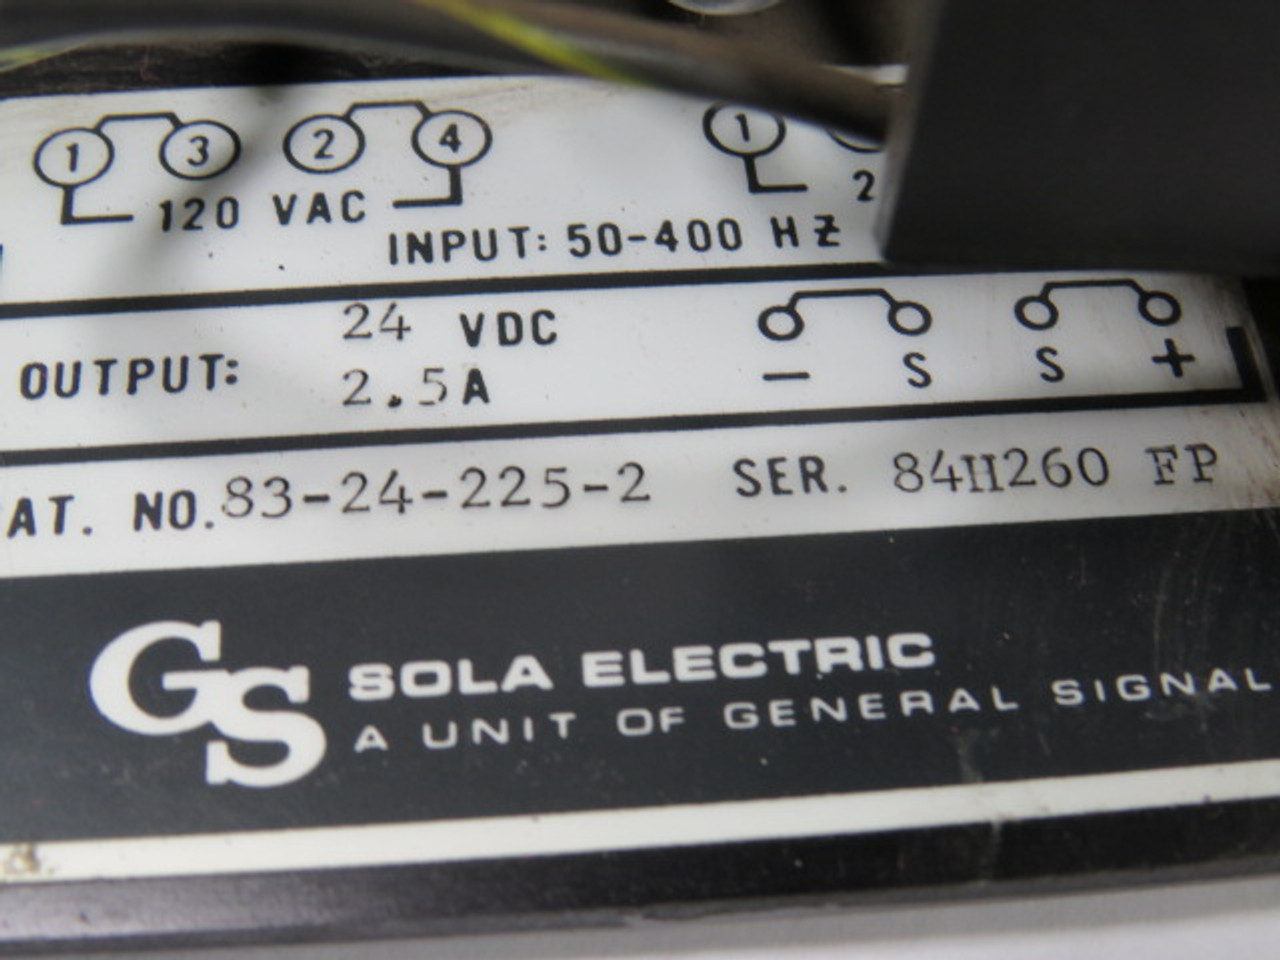 Sola Electric 83-24-225-2 Power Supply Series 84H260FP 2.5A 24VDC USED